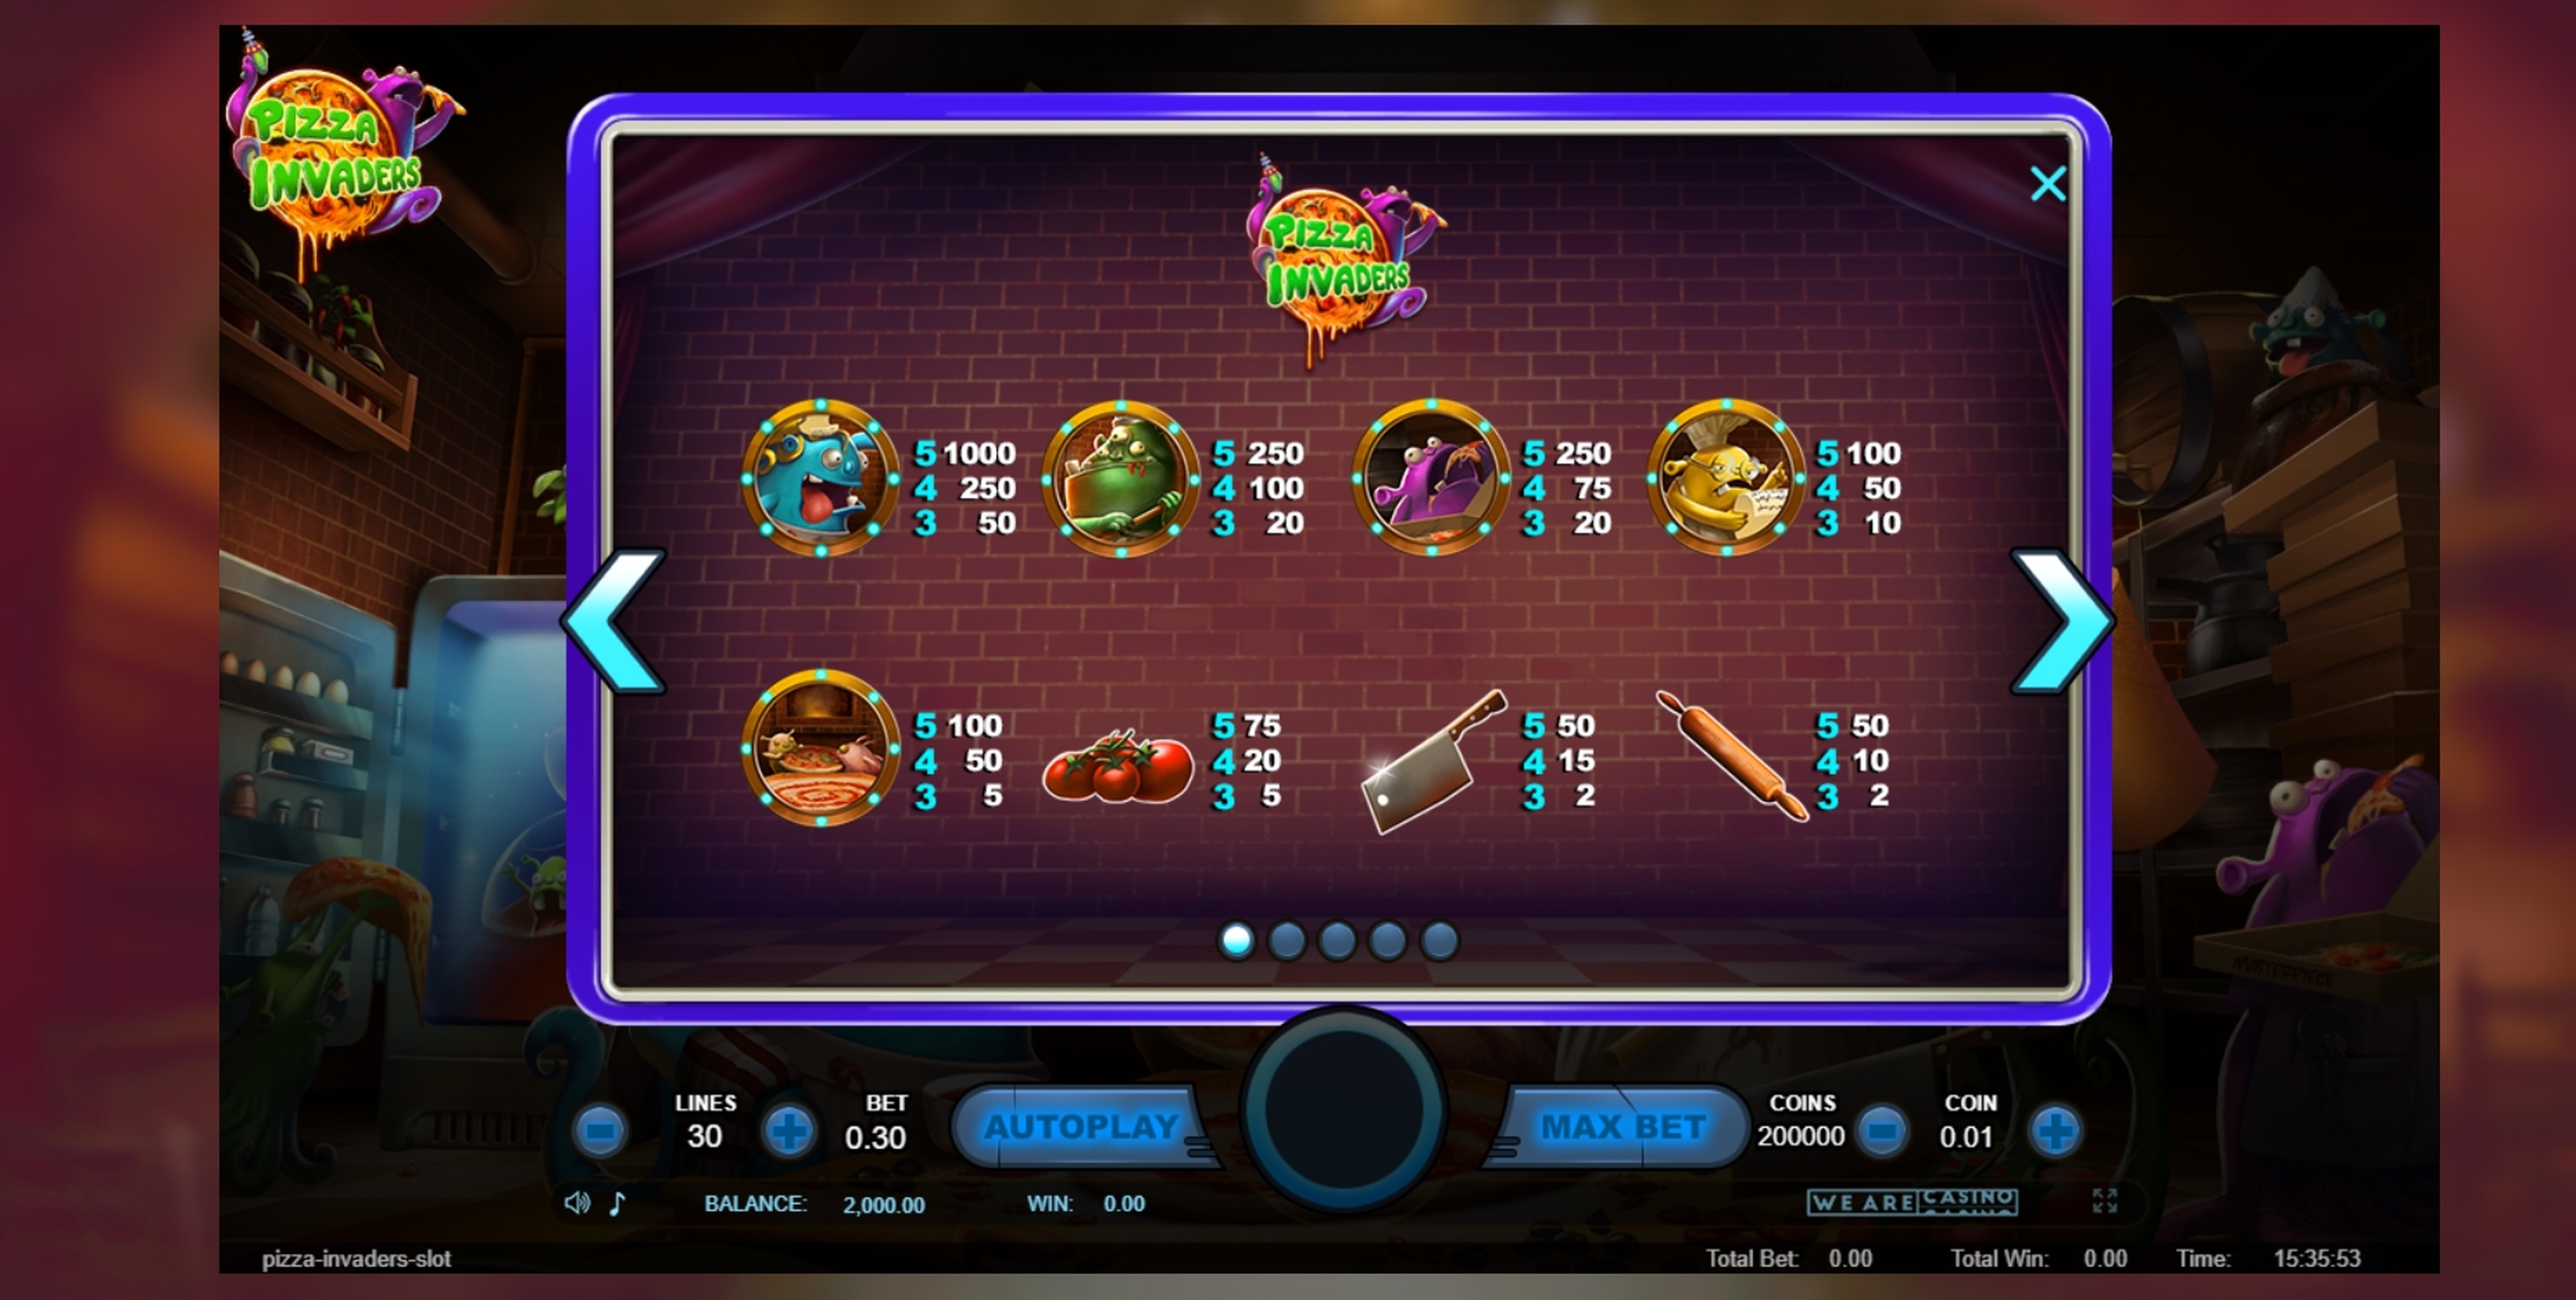 Info of Pizza Invaders Slot Game by We Are Casino